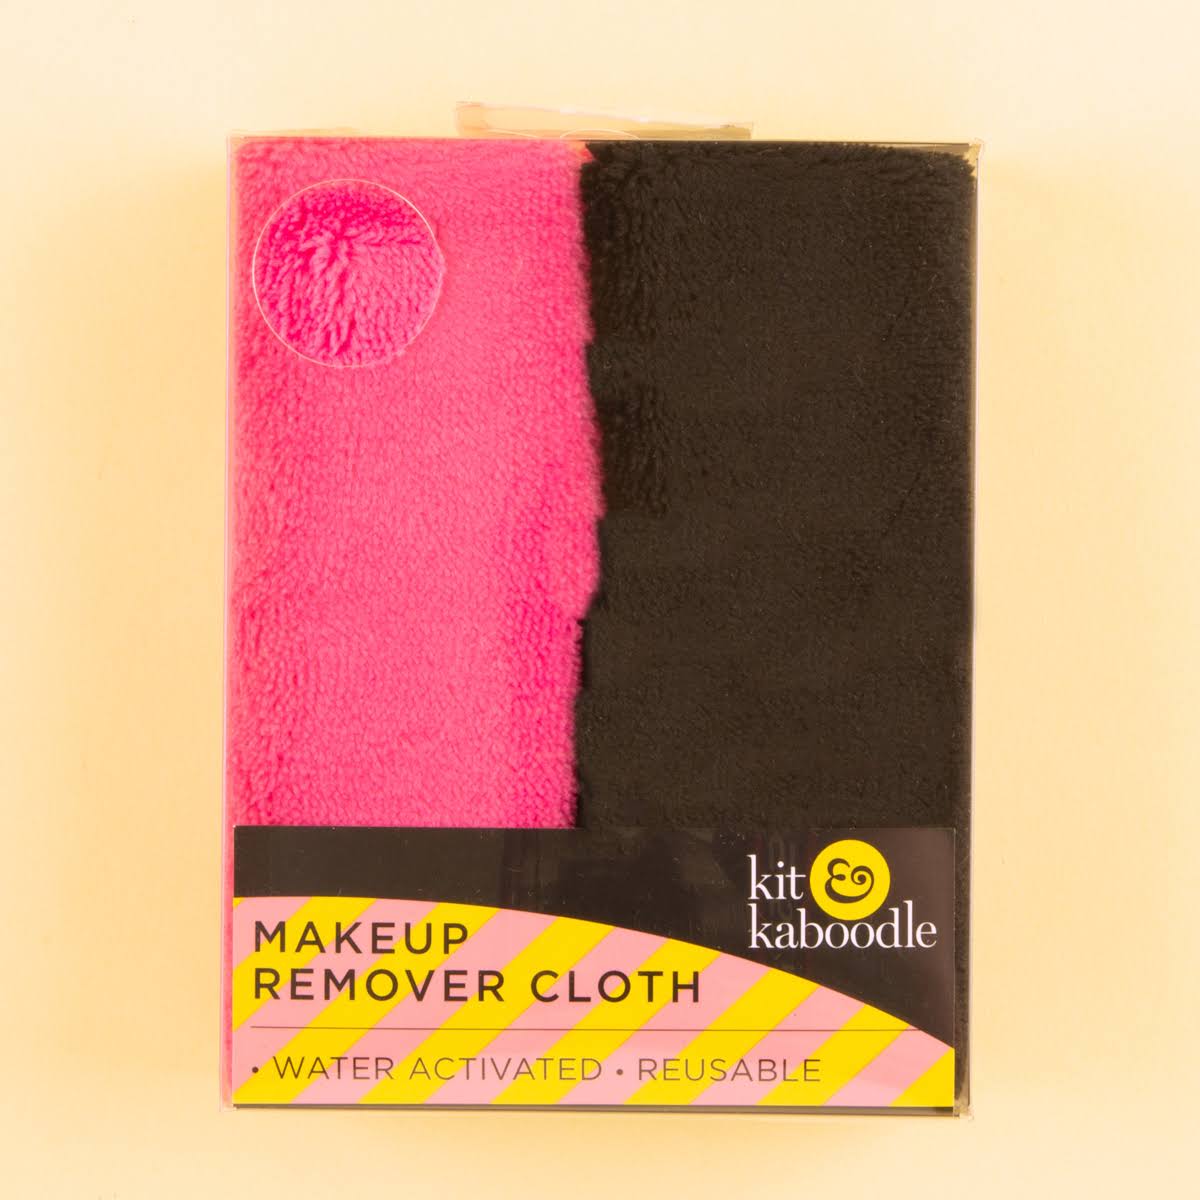 Kit & Kaboodle Makeup Remover Cloth 2 Pack